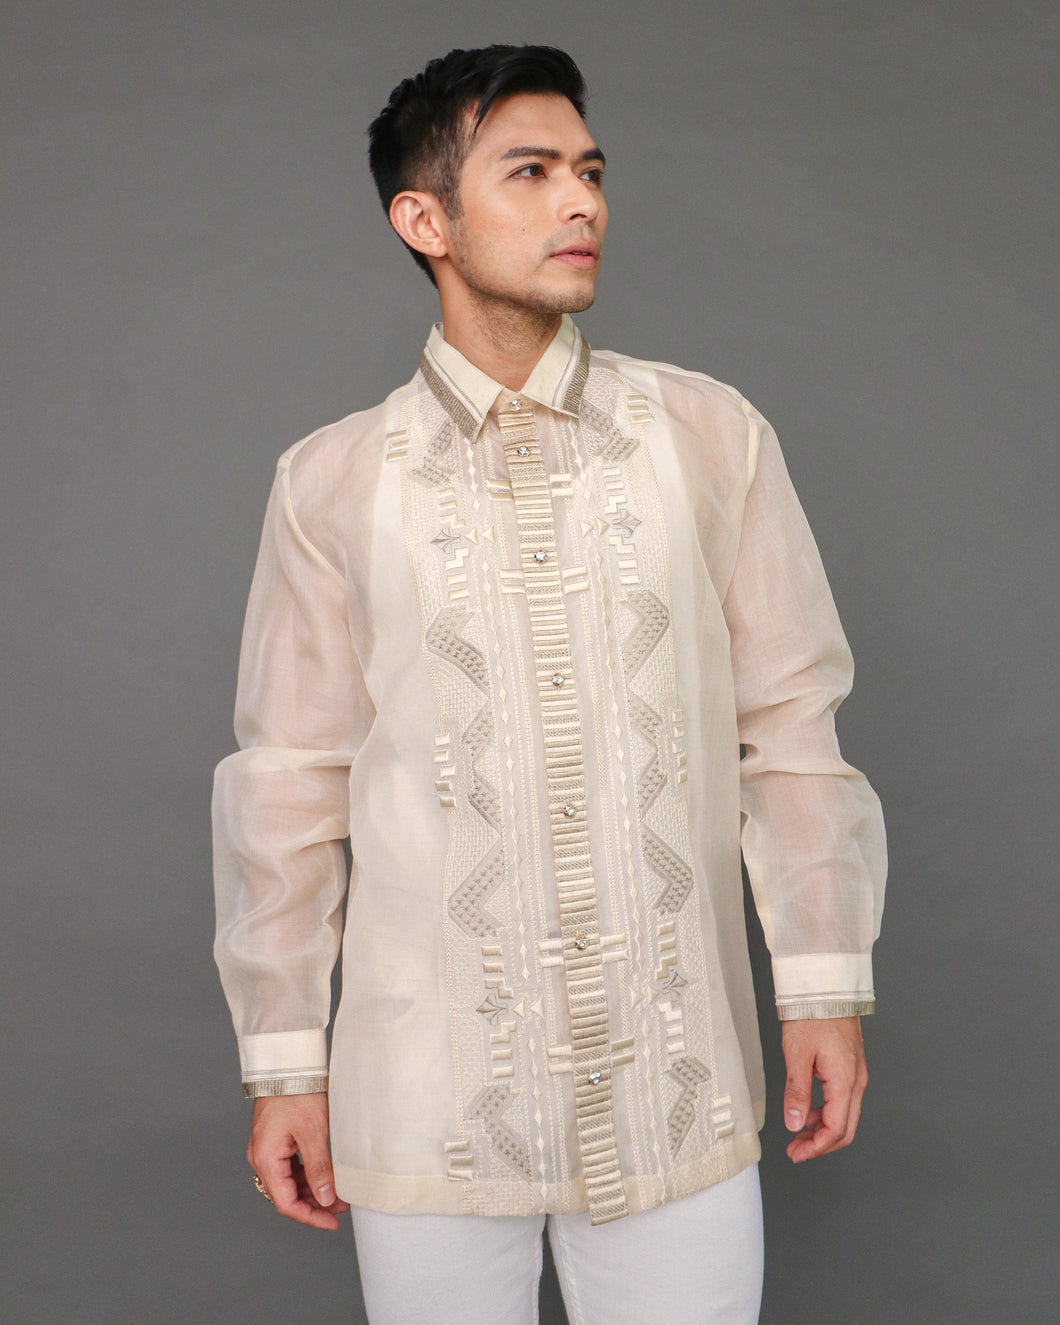 Gwapo! Premium Pina Barong for Men in Geometric Pattern by Berches